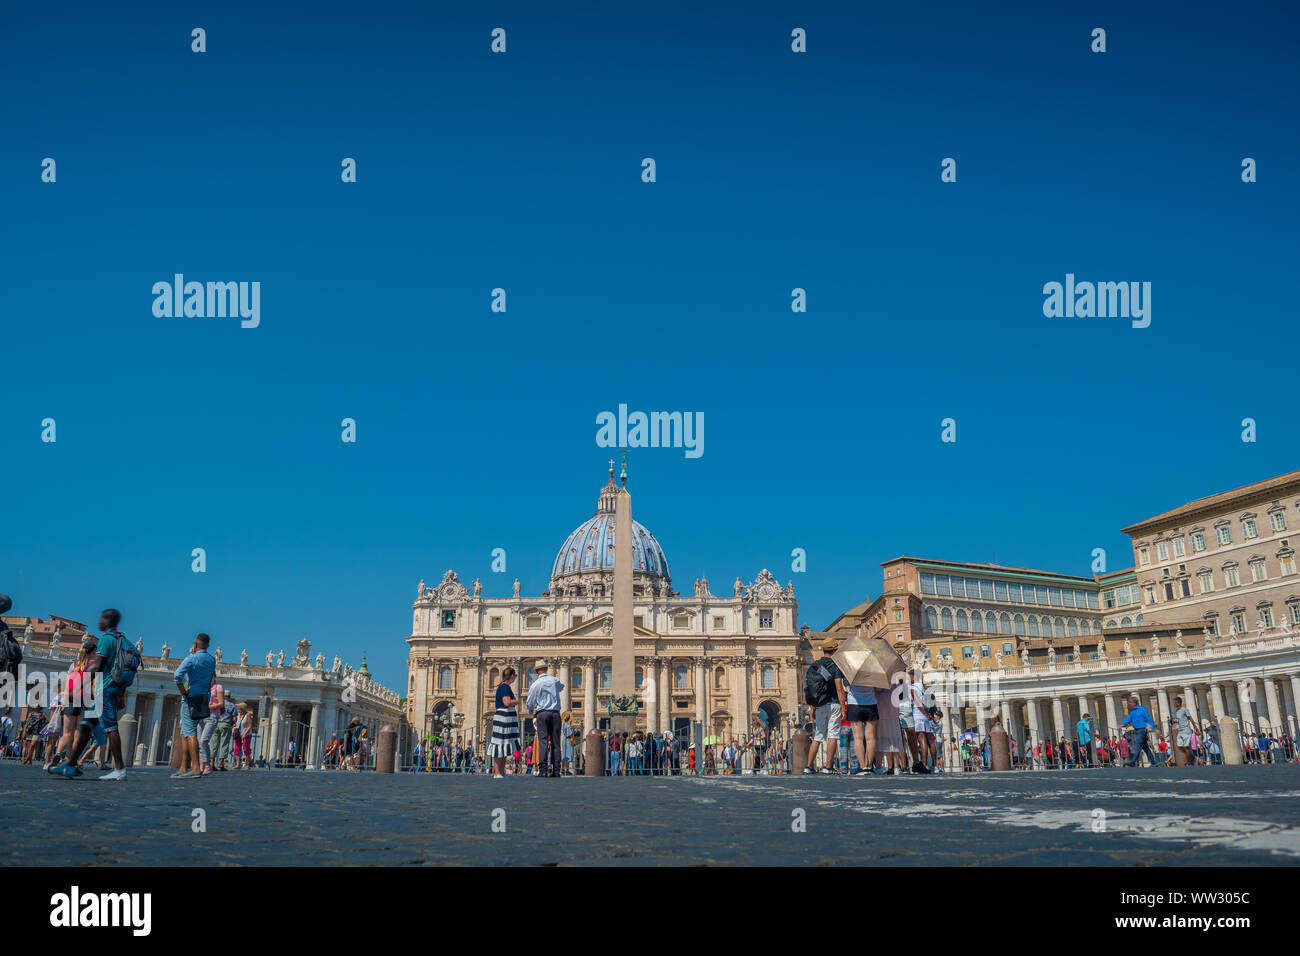 St. Peter's Basilica and the Egyptian Obelisk in St. Peter's Square in Vatican City Stock Photo